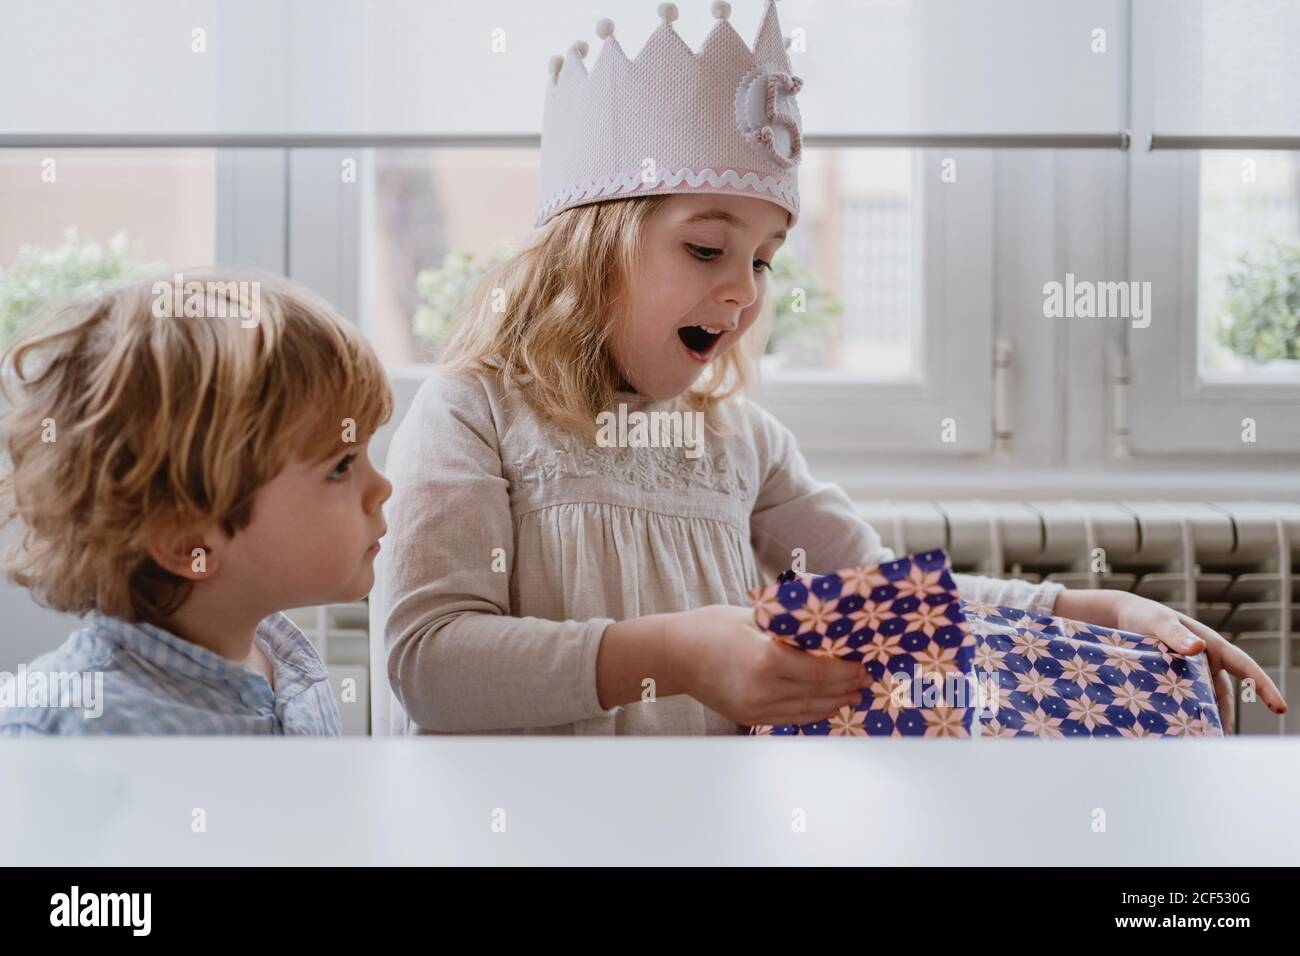 Excited charming girl in handmade crown unwrapping gift box while having birthday celebration at home Stock Photo